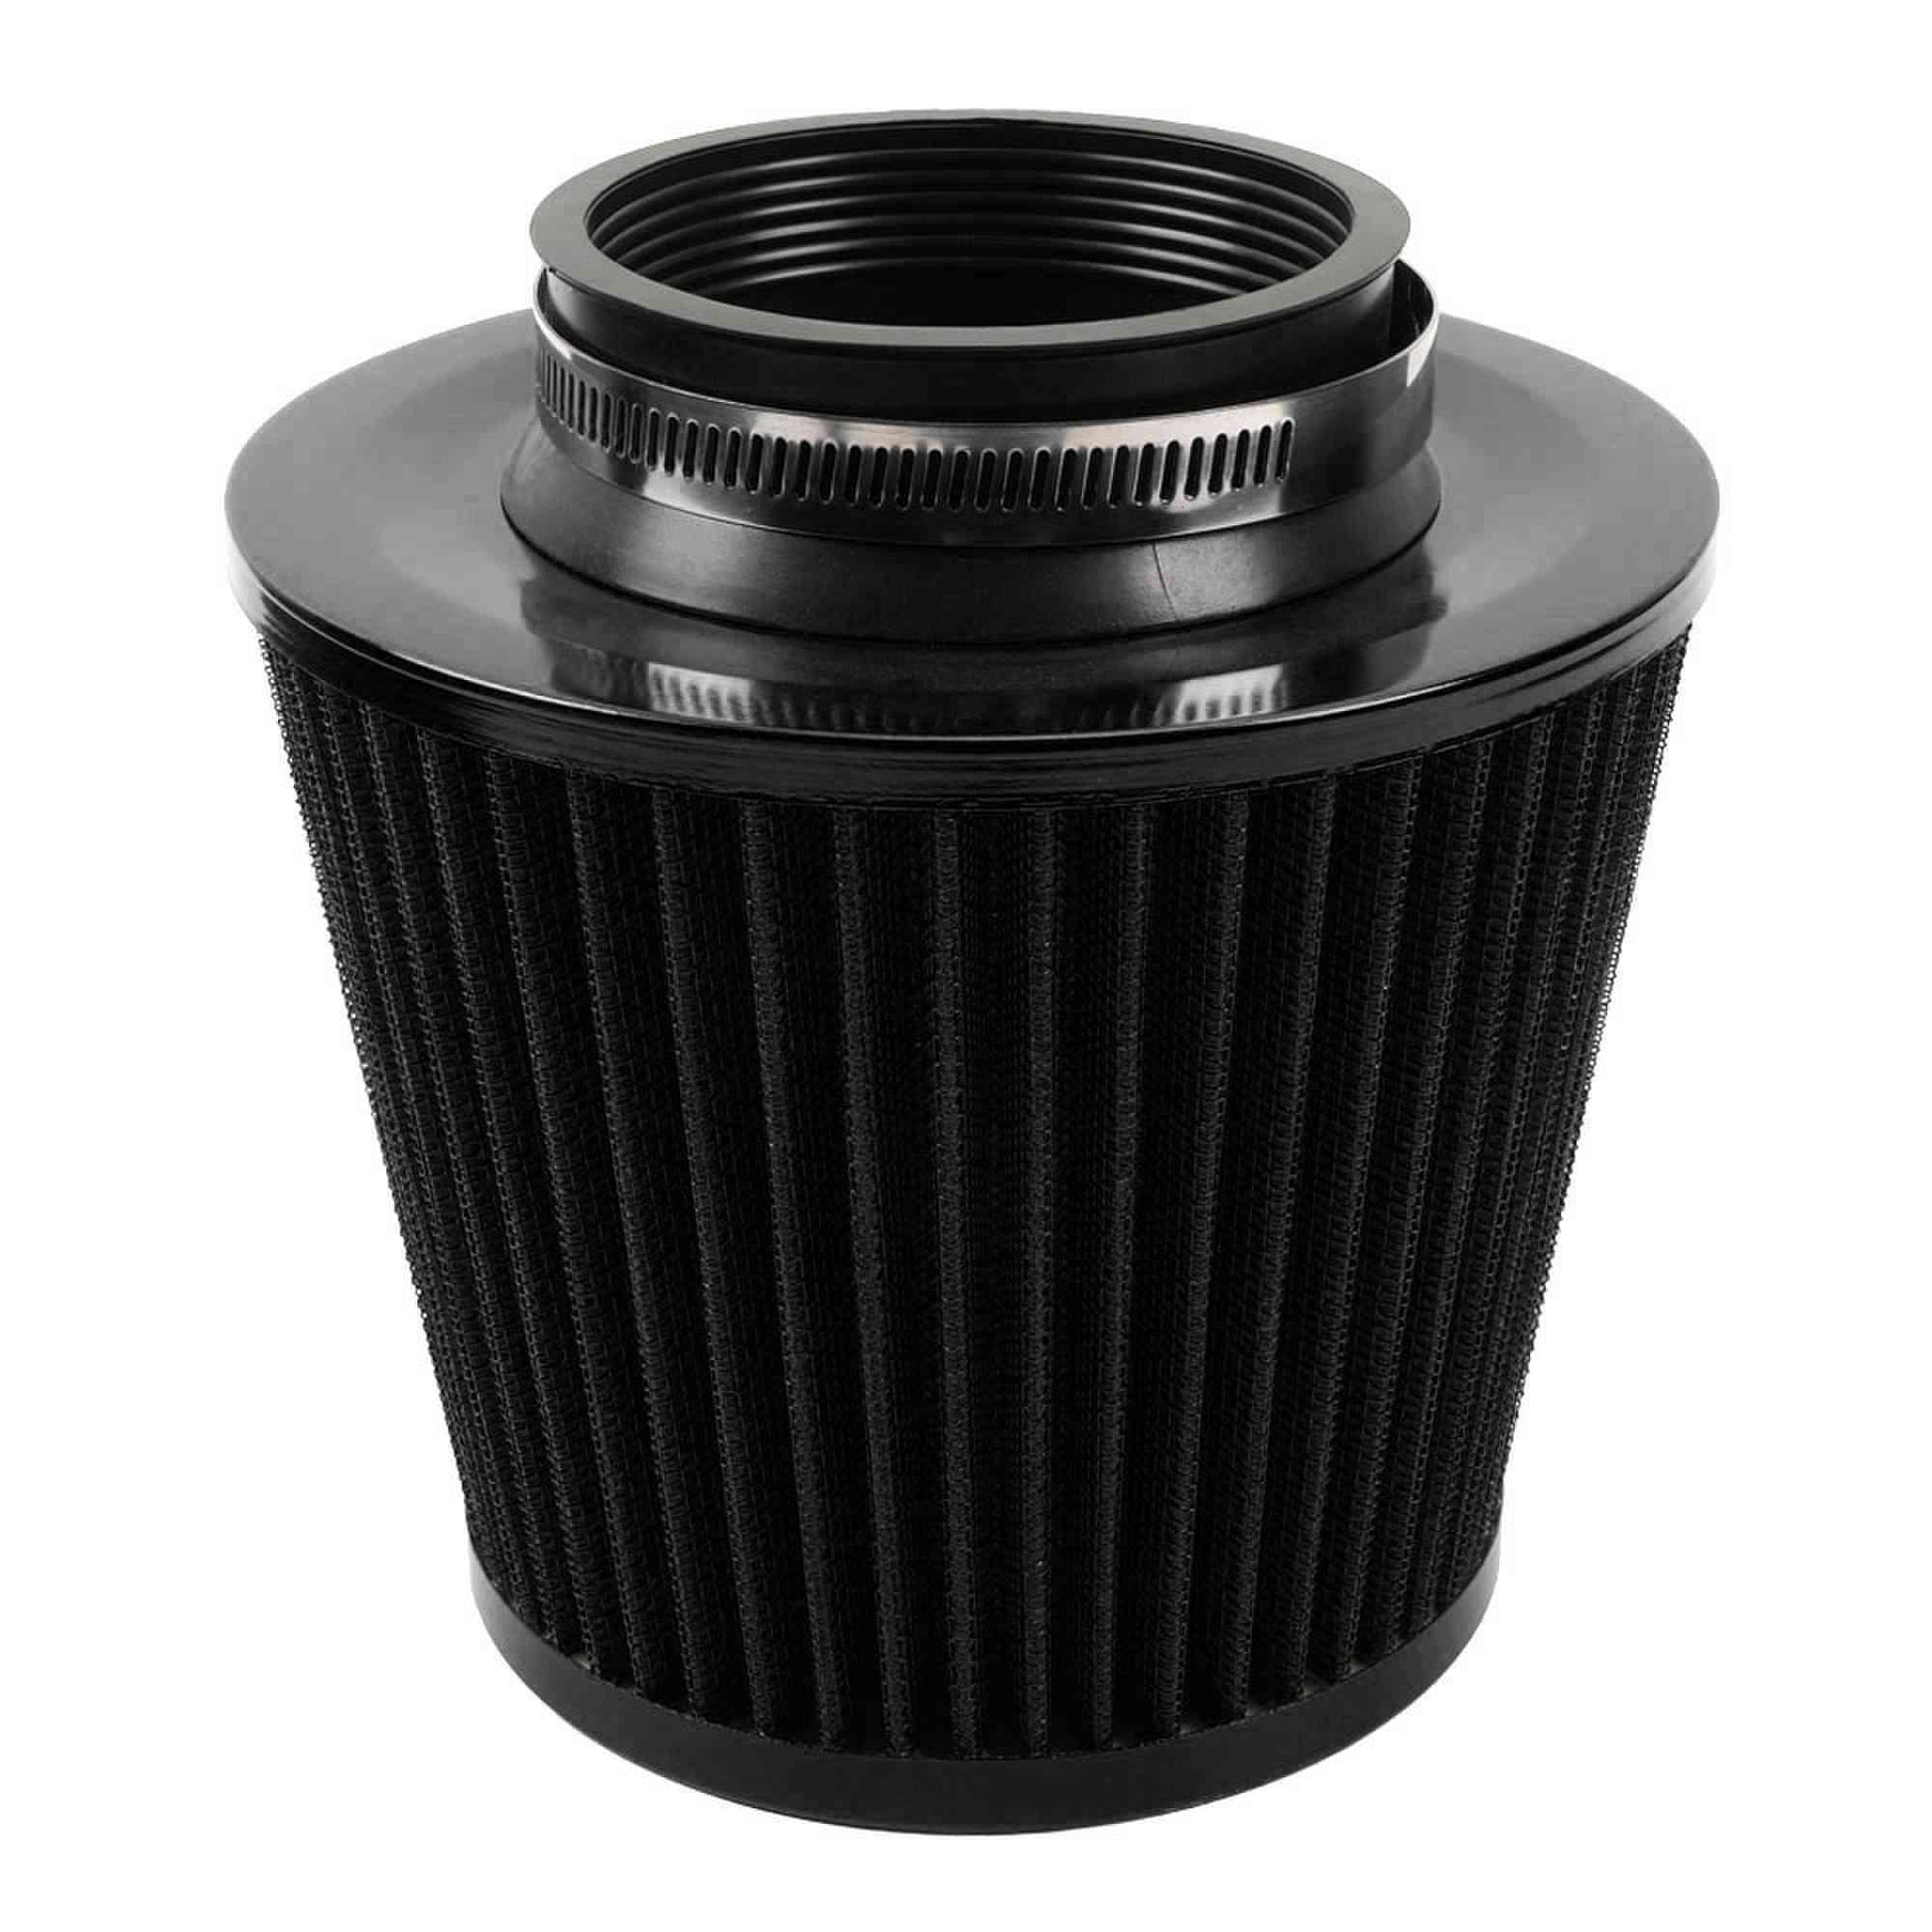 RASTP Universal 76mm Stainless Steel High Power Flow Cold Air Filter Car Round Cone Air Intake Filter Induction Kit - RASTP